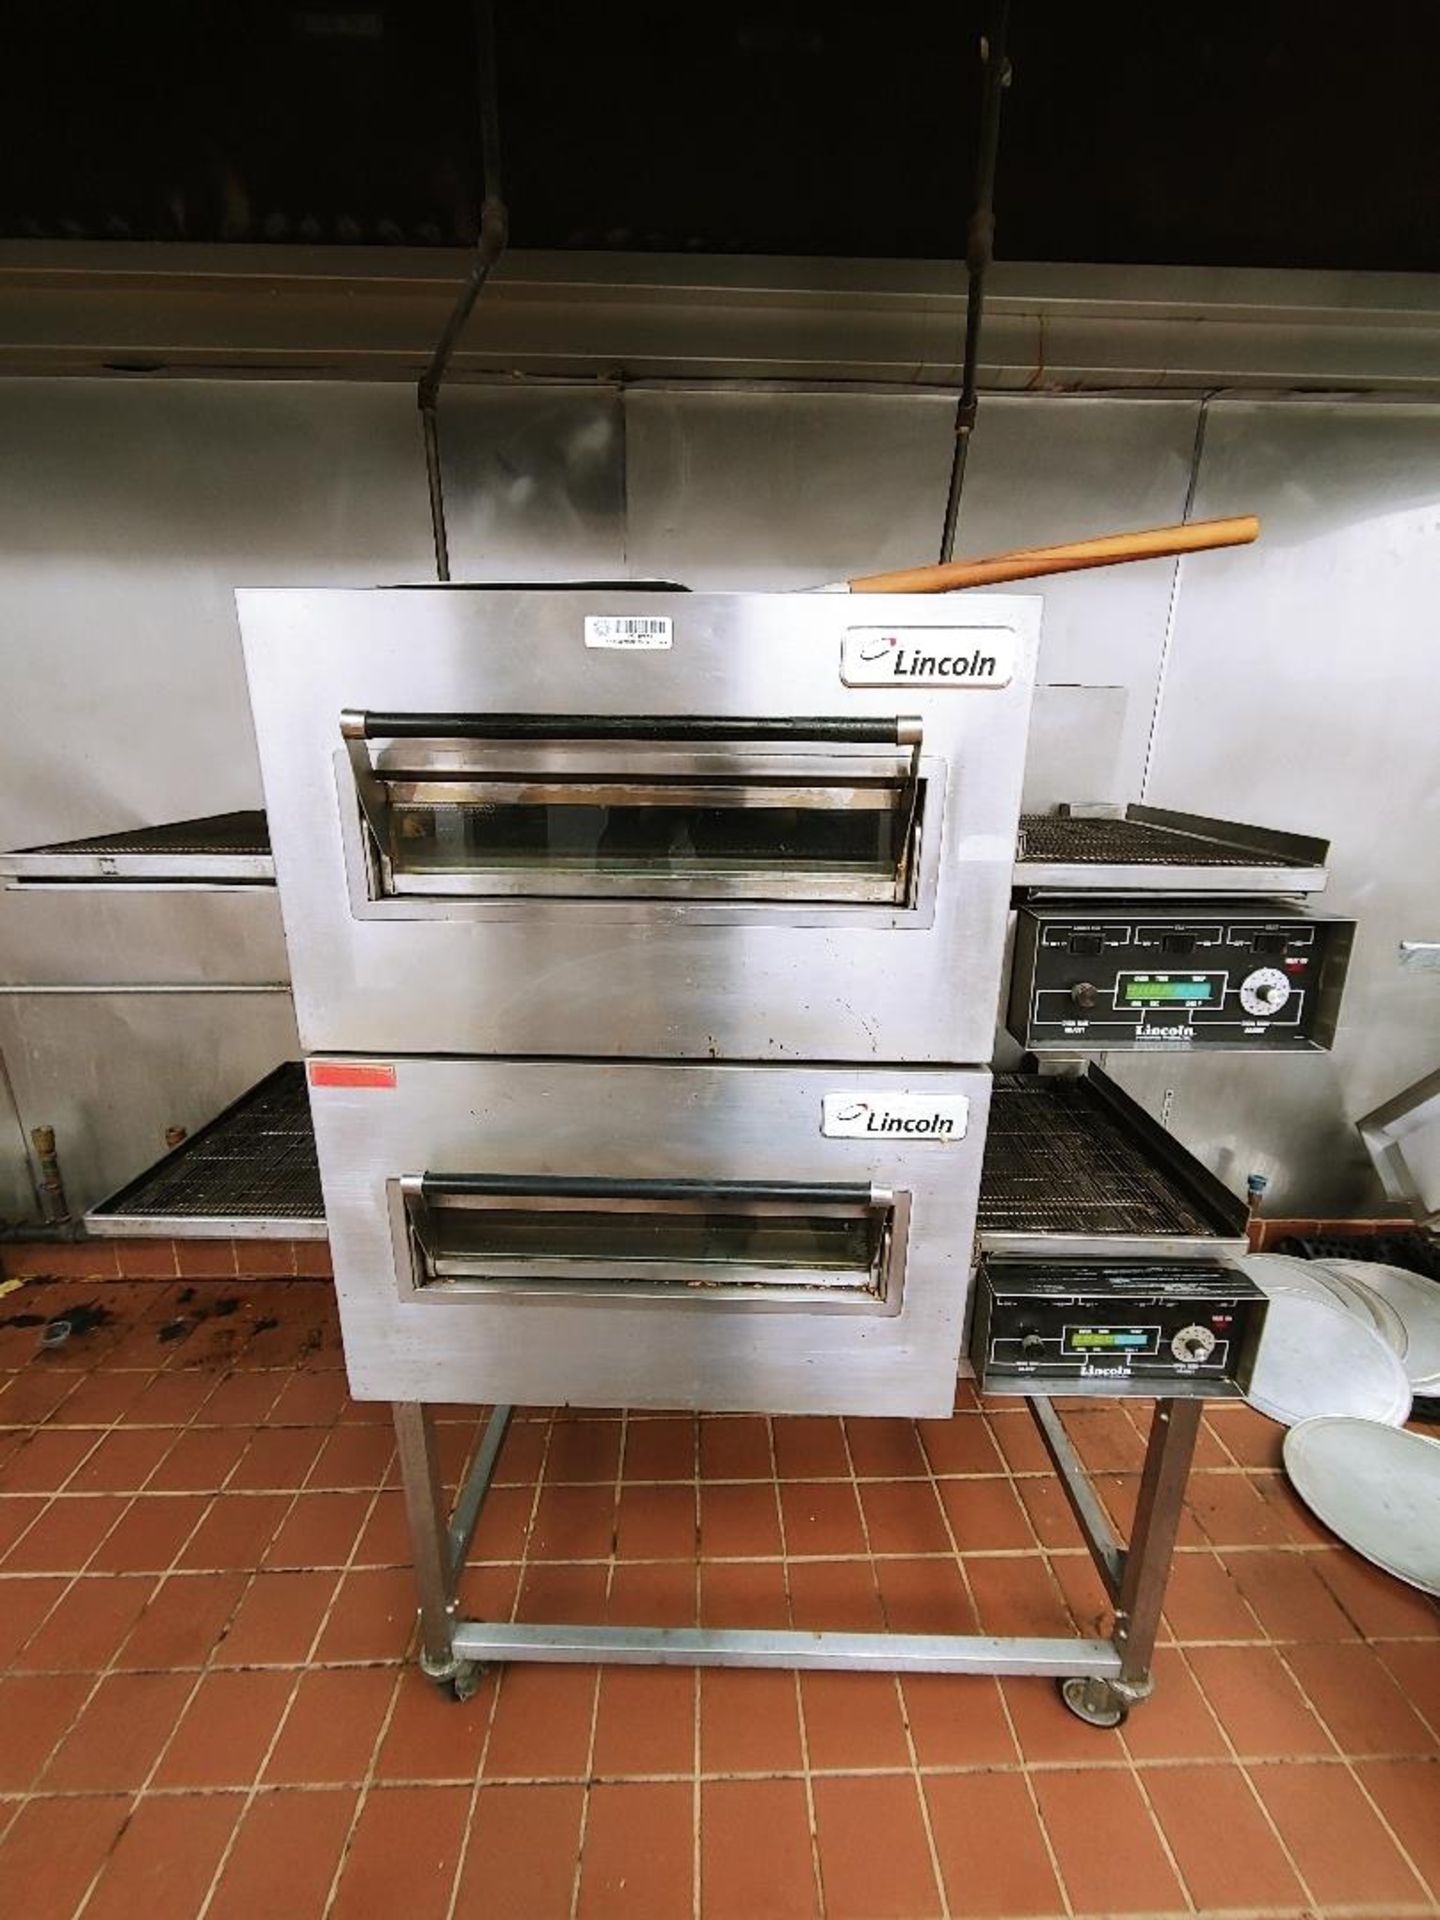 LINCOLN FOODSERVICE PRODUCTS INC. DUAL CONVEYOR PIZZA OVEN WITH DIGITAL CONTROL PANELS, MODEL 1162-0